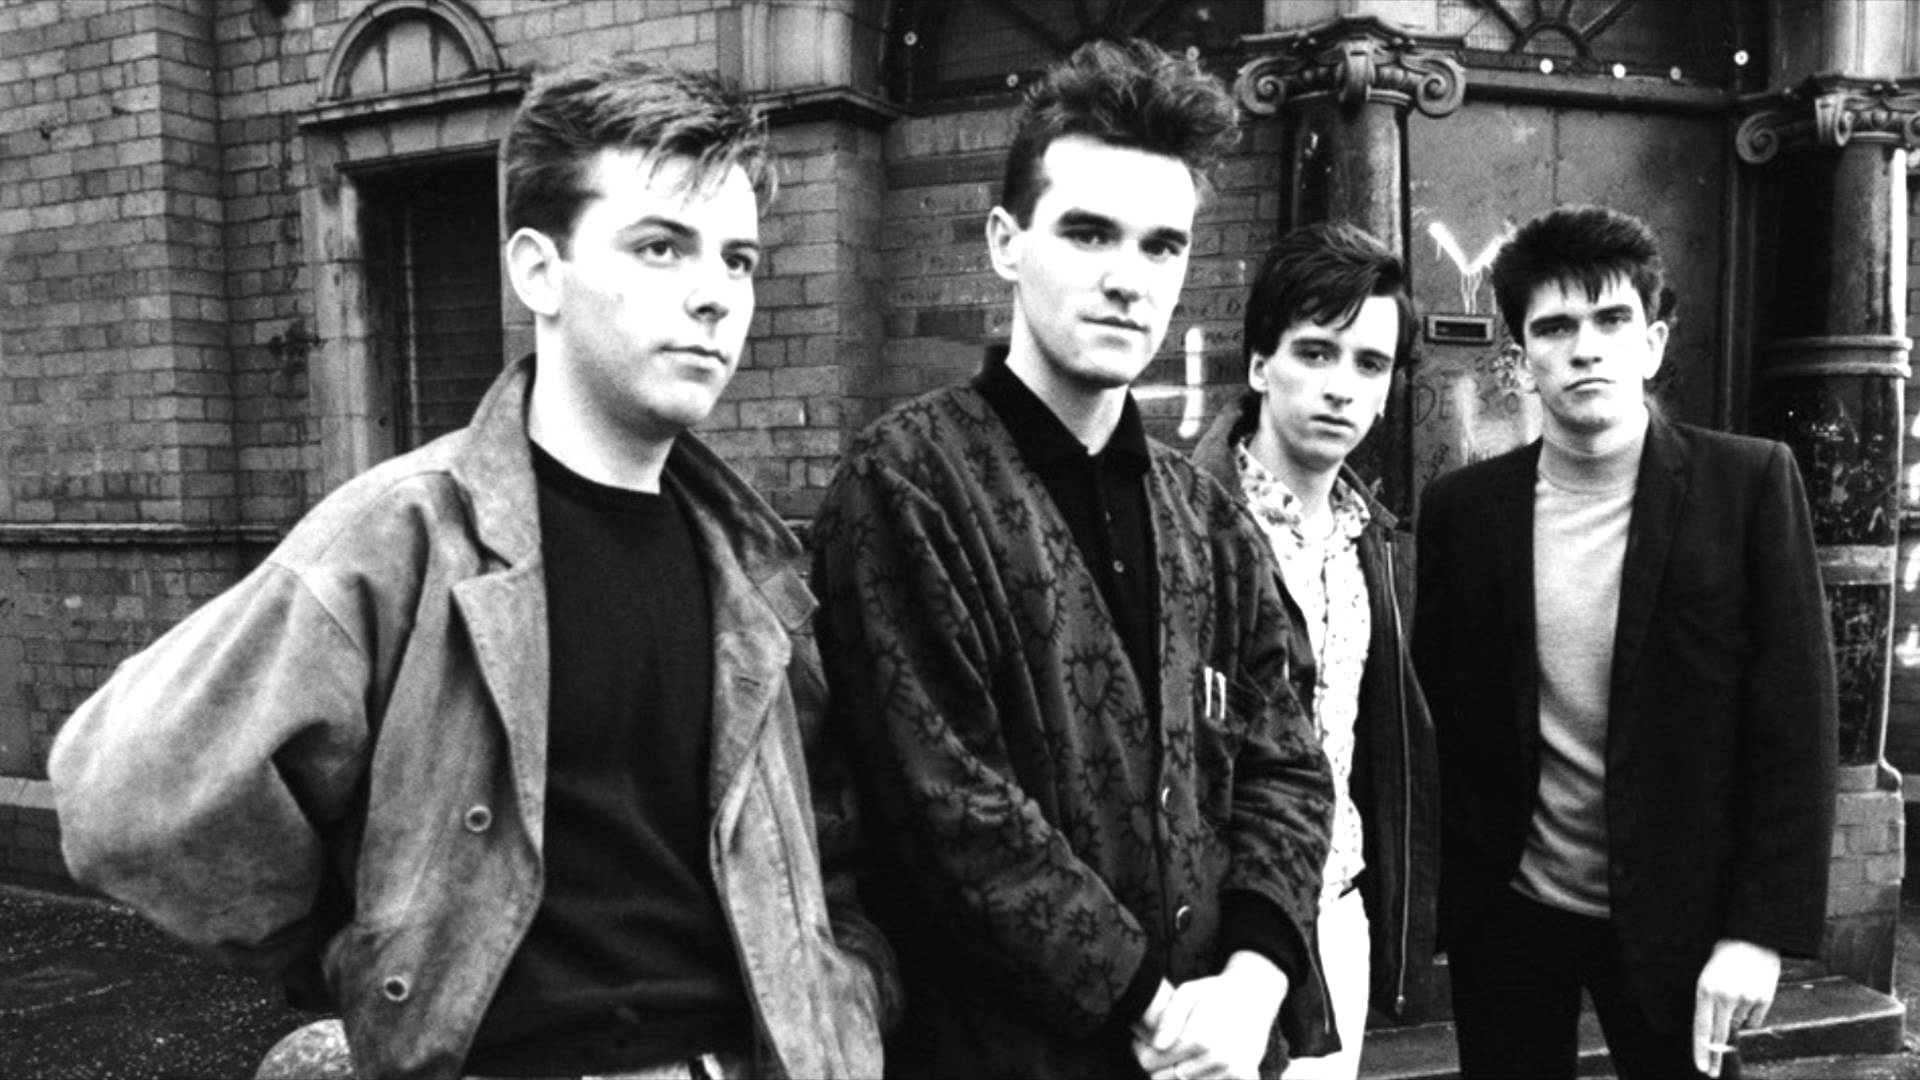 The Smiths - How Soon Is Now - I Am Human And I Need To Be Loved